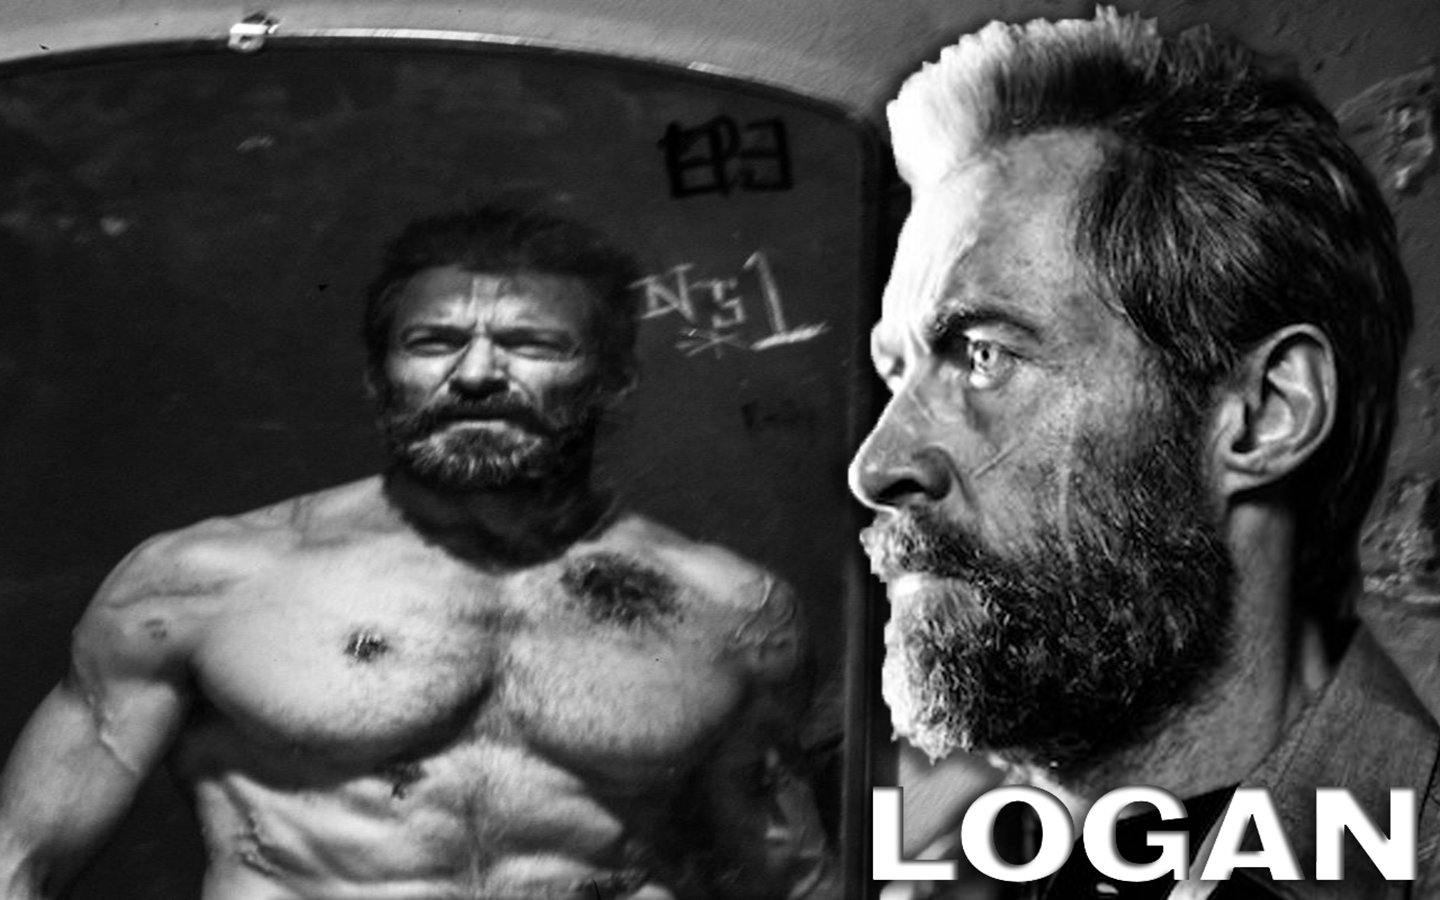 Logan Is Now the Highest-Grossing Film of 2017